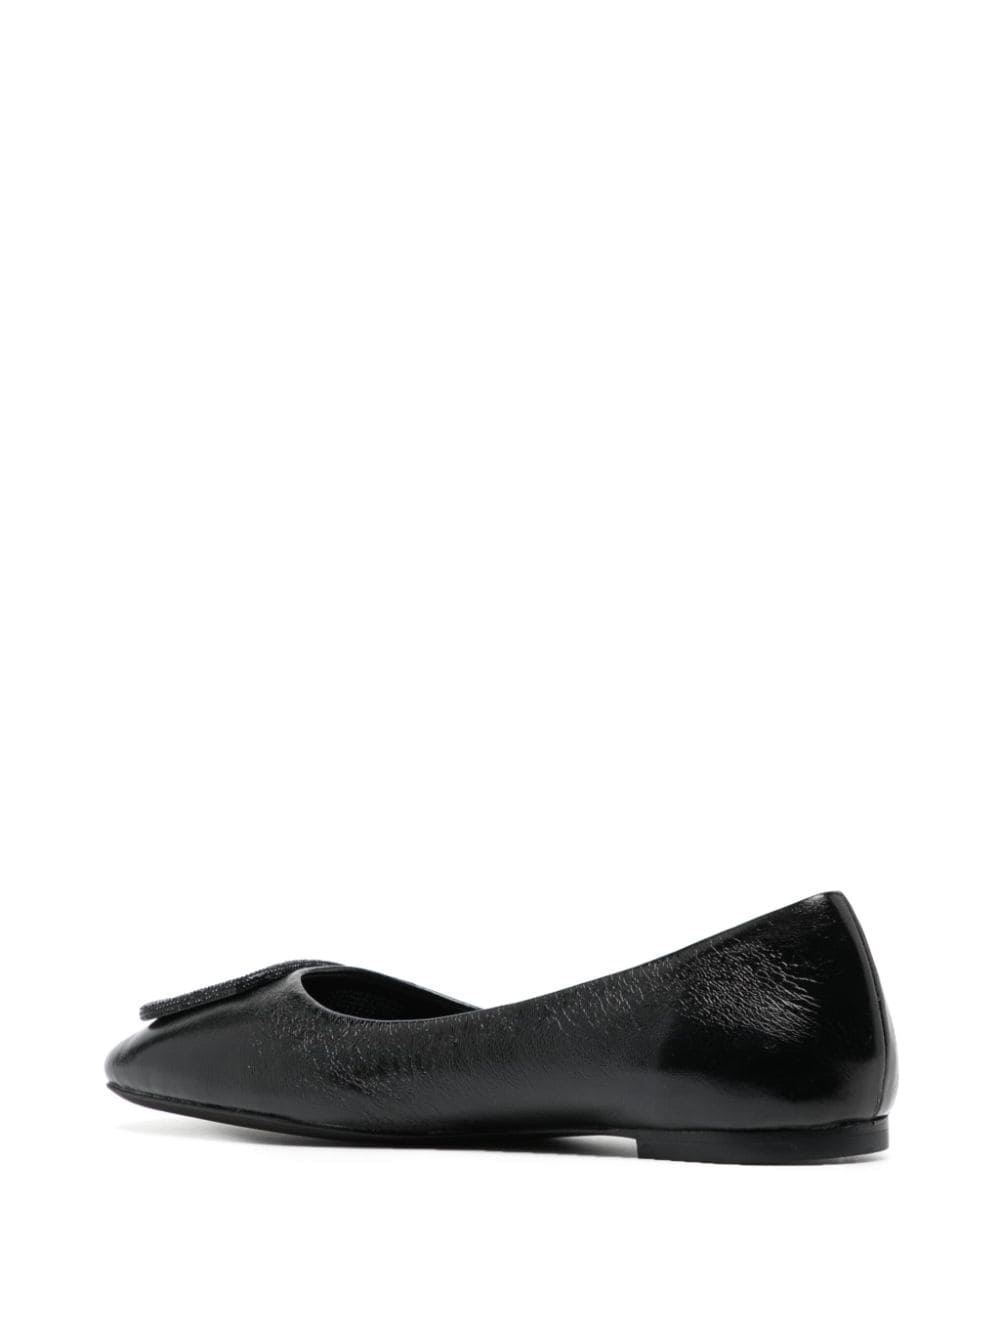 Shop Tory Burch Gerogia Pavé Leather Ballerina Shoes In Black